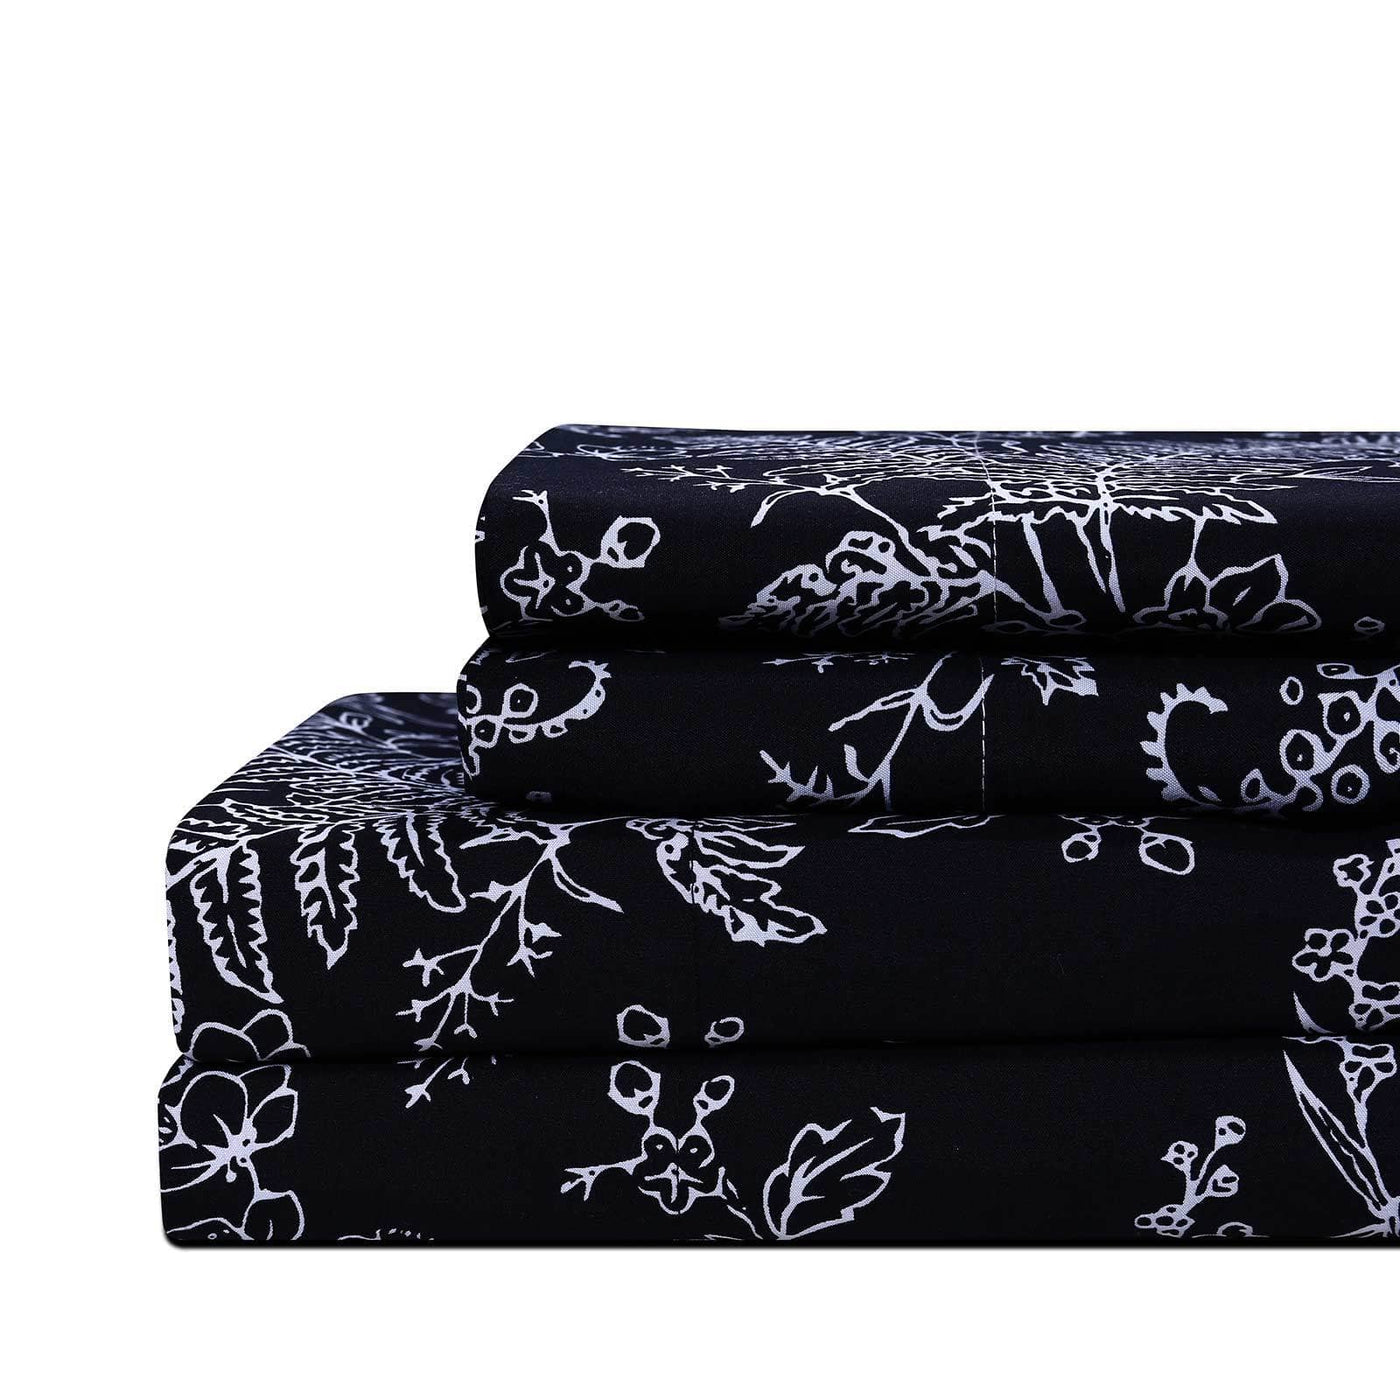 Winter Brush Print Ultra Soft and Supreme Quality Sheet Set in Black with White Flowers#color_winter-brush-black-with-white-flowers